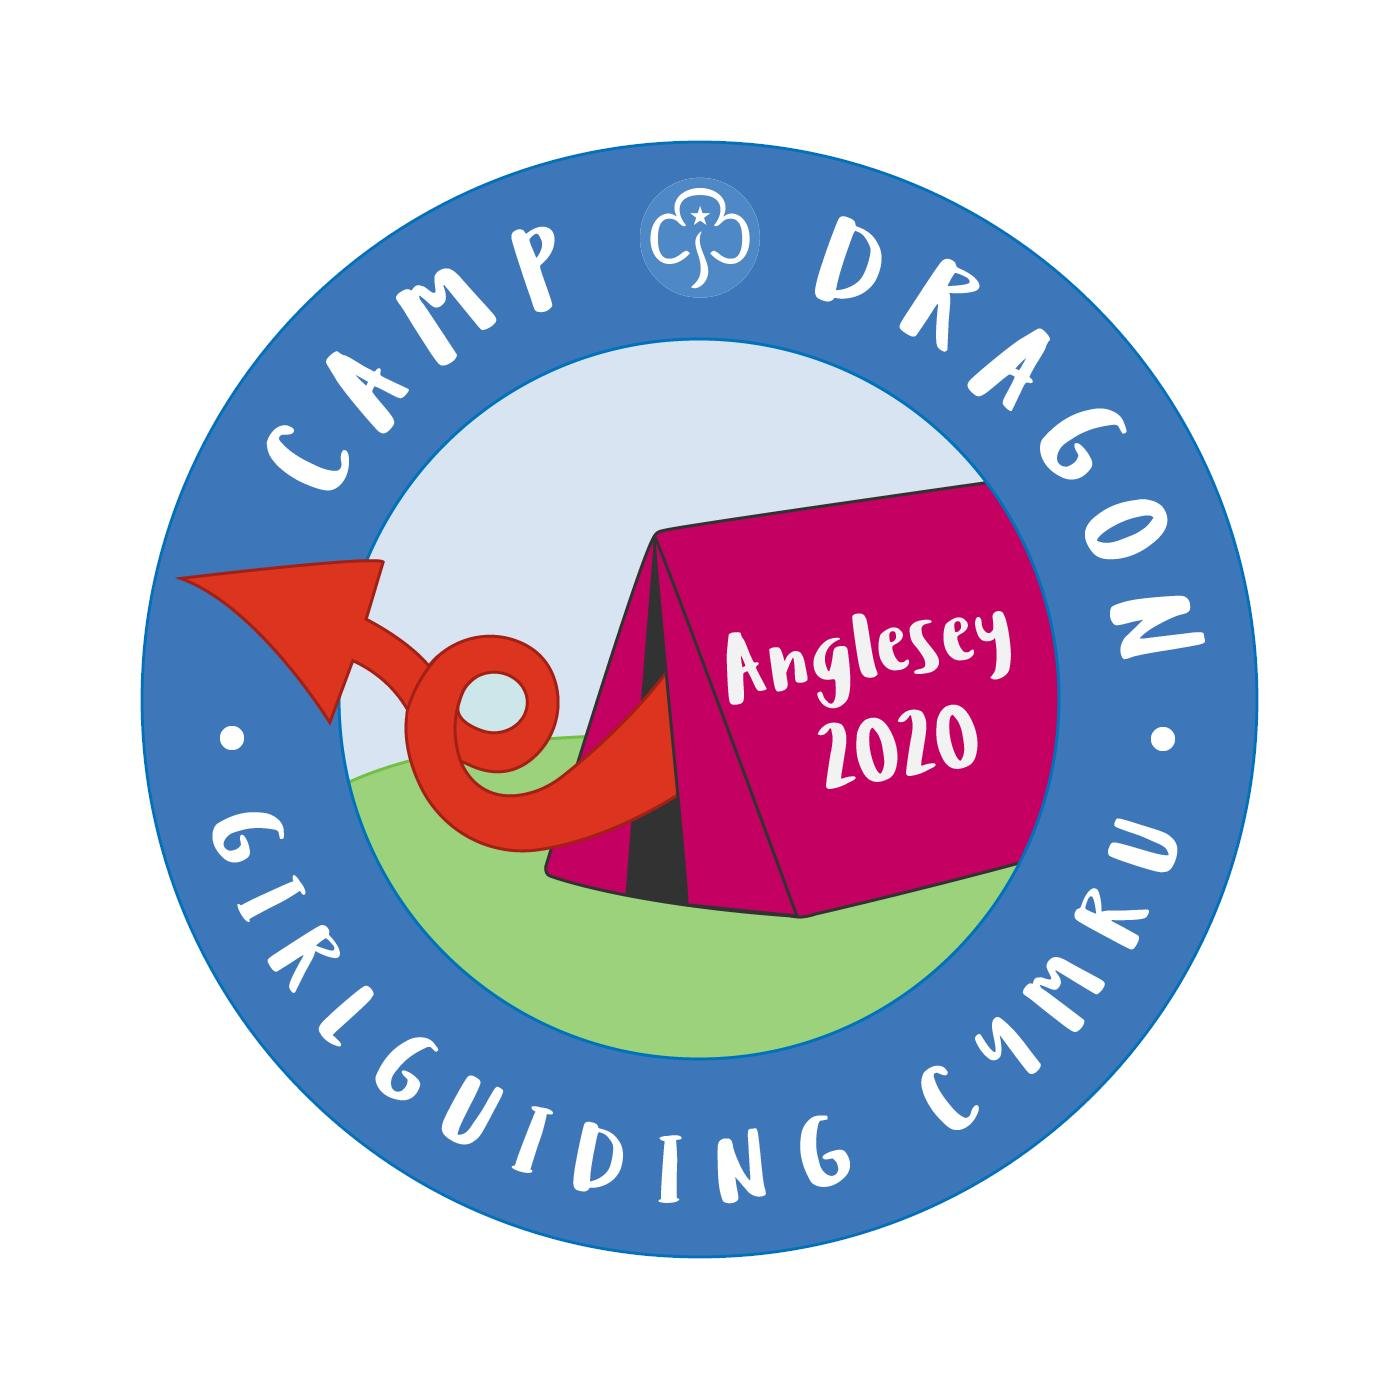 Discover Girlguiding Cymru's 2020 International Camp, Camp Dragon. Located on the Island of Anglesey, Wales in August 2020 😃🌞🏕️